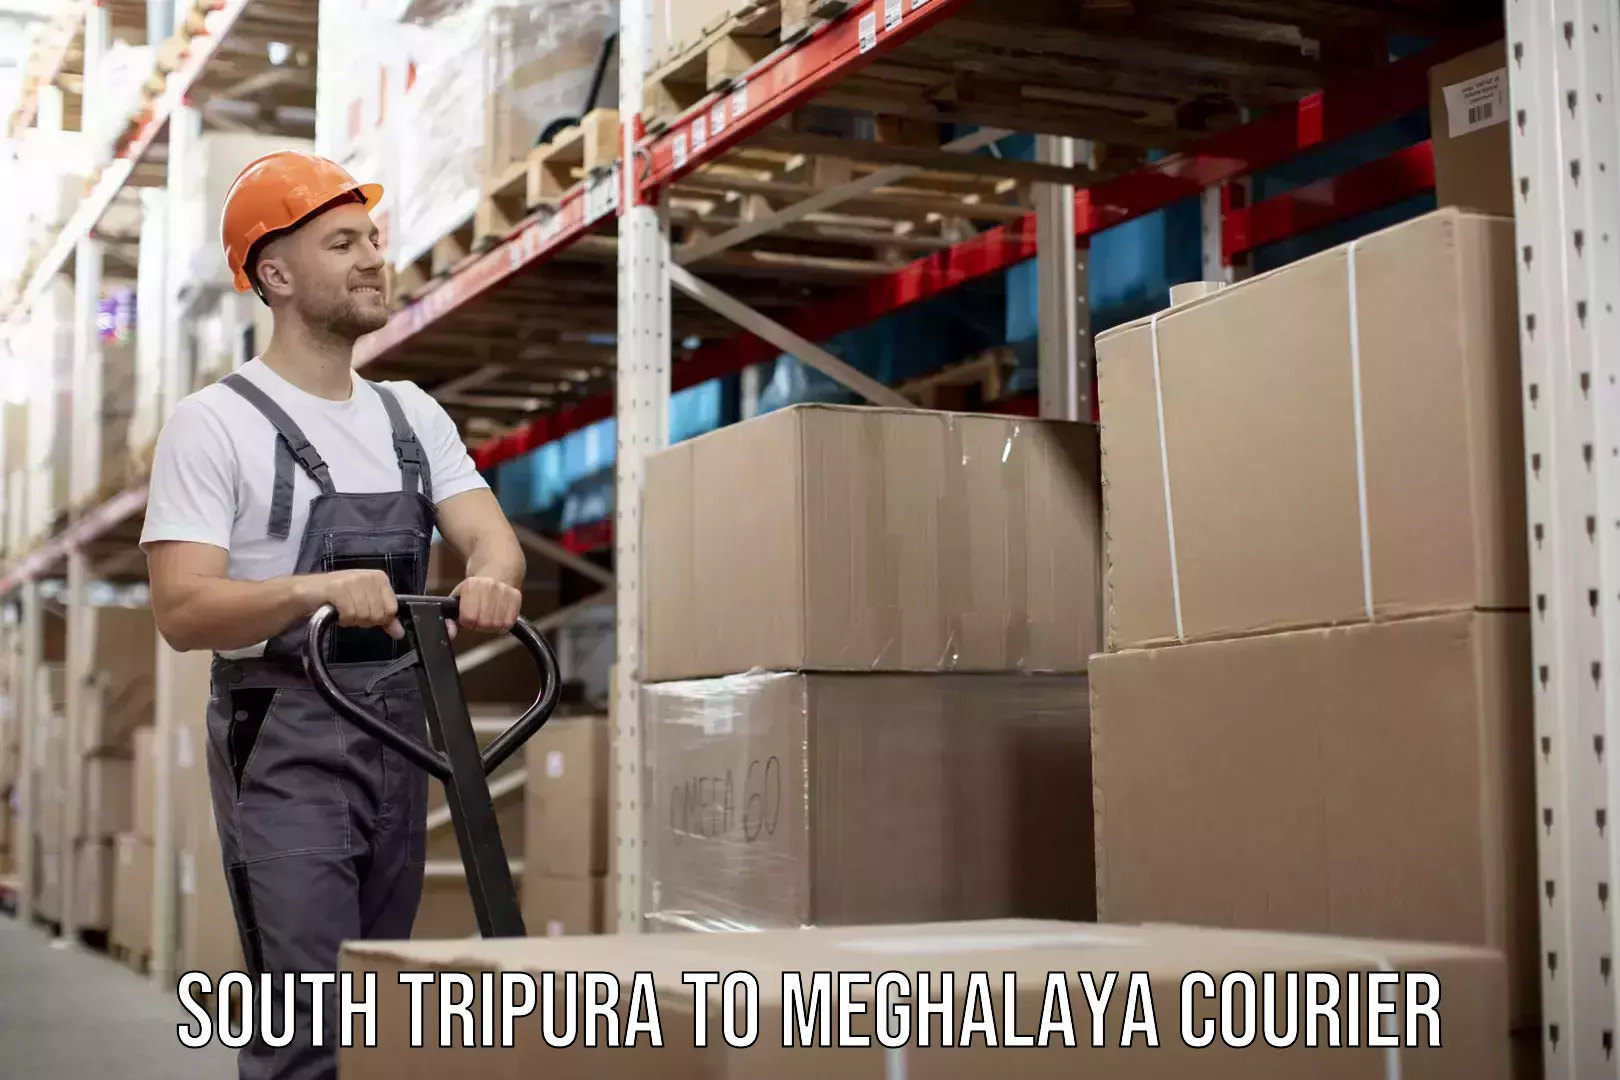 Corporate courier solutions South Tripura to Meghalaya